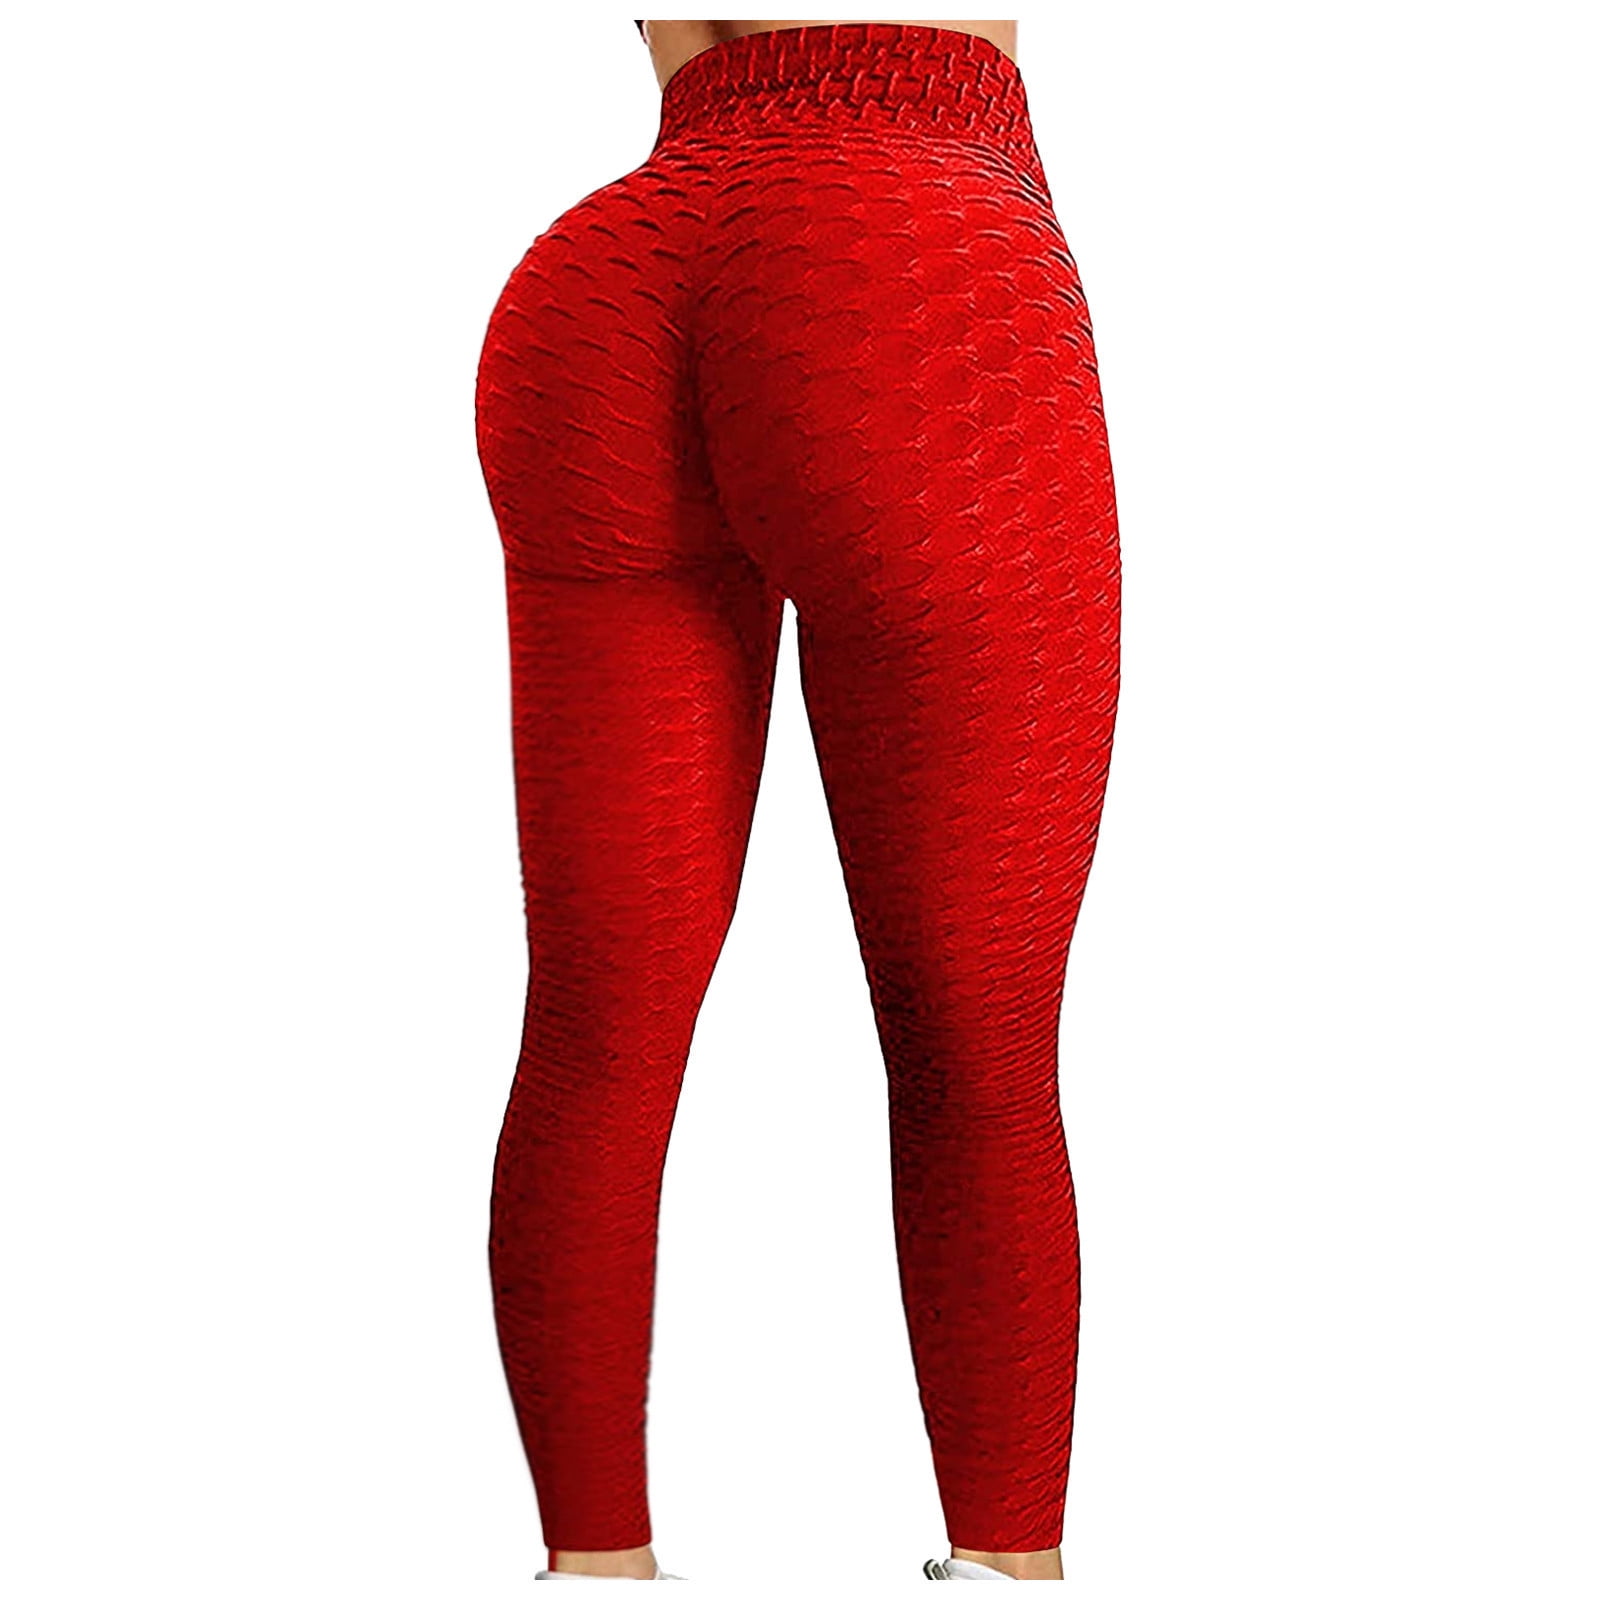 RQYYD Clearance Women's Plus Size High Waist Yoga Pants Tummy Control  Workout Ruched Butt Lifting Stretchy Leggings Textured Booty Tights(Red,XXL)  